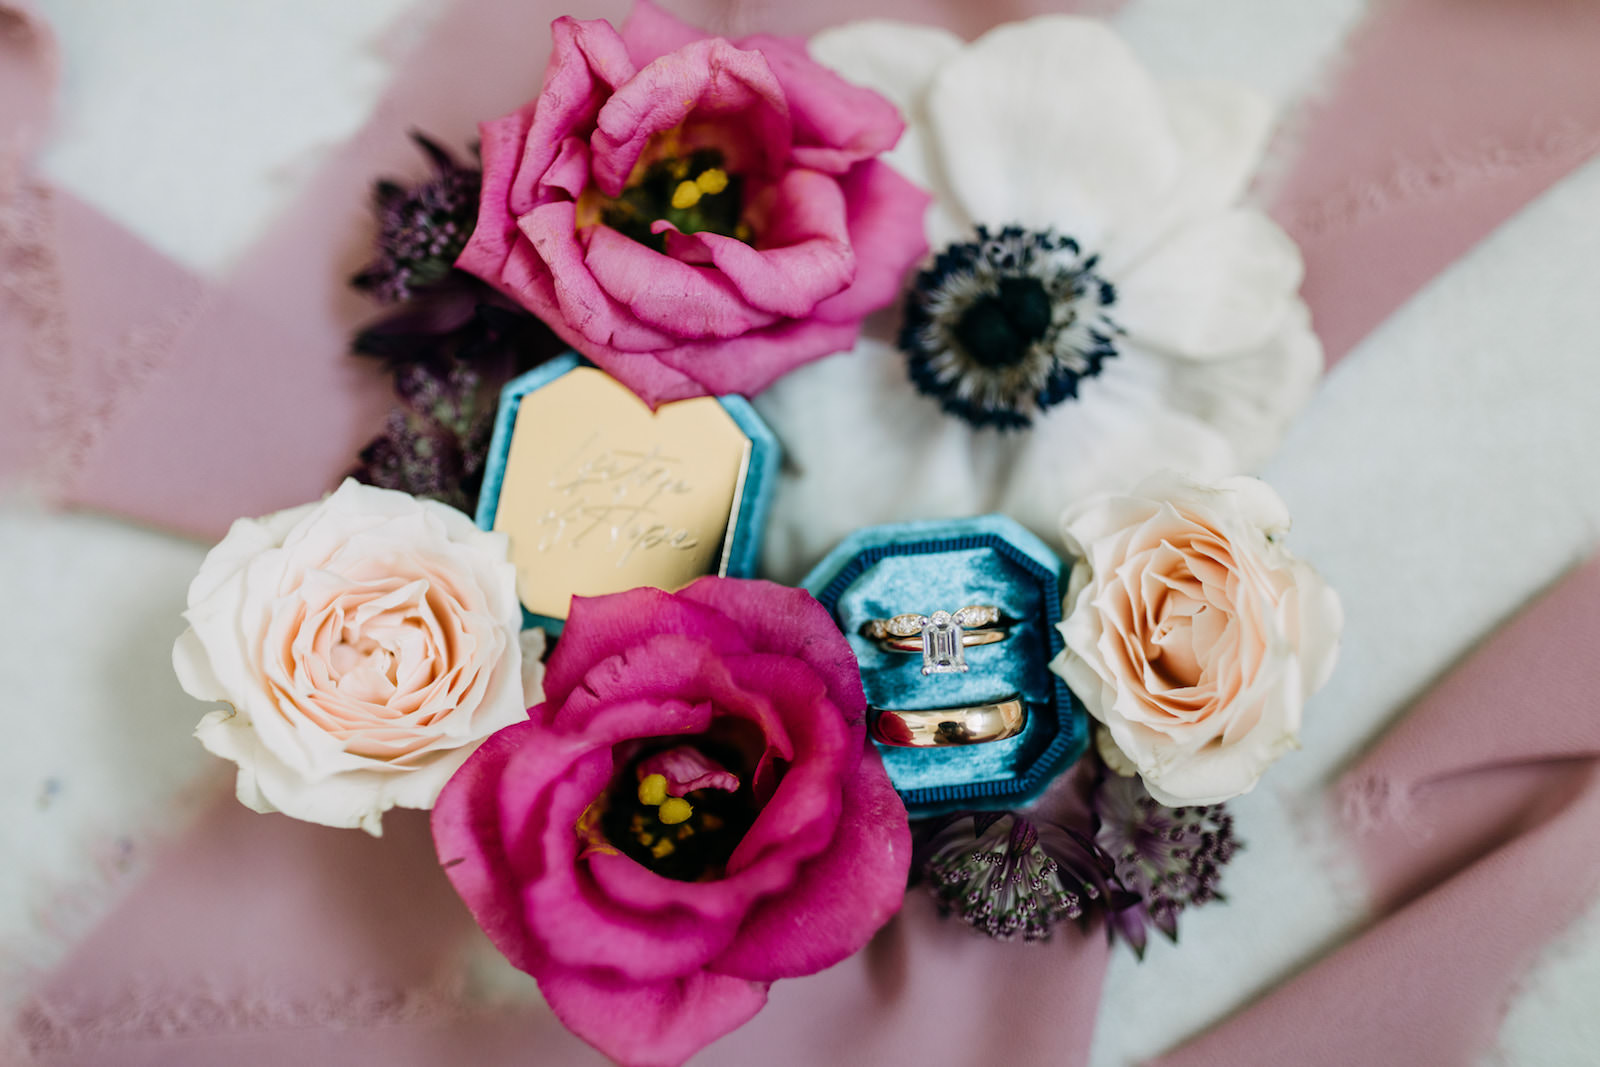 Jewel Toned Pink Wedding Flowers, Blue and Gold Velvet Ring Box with Bride and Groom Wedding Rings | Tampa Bay Wedding Photographer Amber McWhorter Photography | Wedding Florist Leaf It To Us